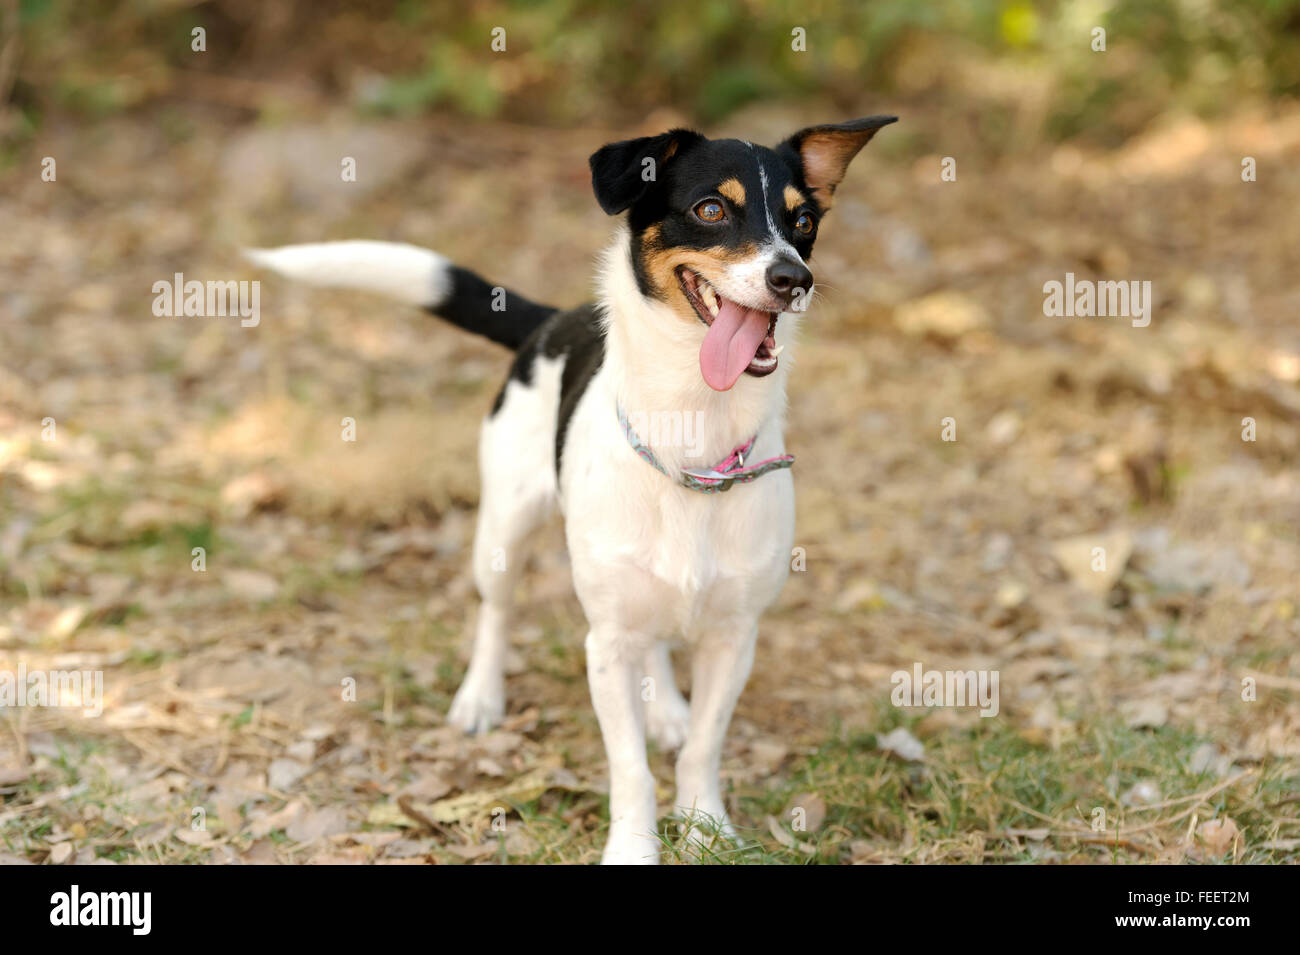 Silly dog is a cute happy little puppy dog outdoors looking funny and silly with googly eyes and his tongue hanging out. Stock Photo